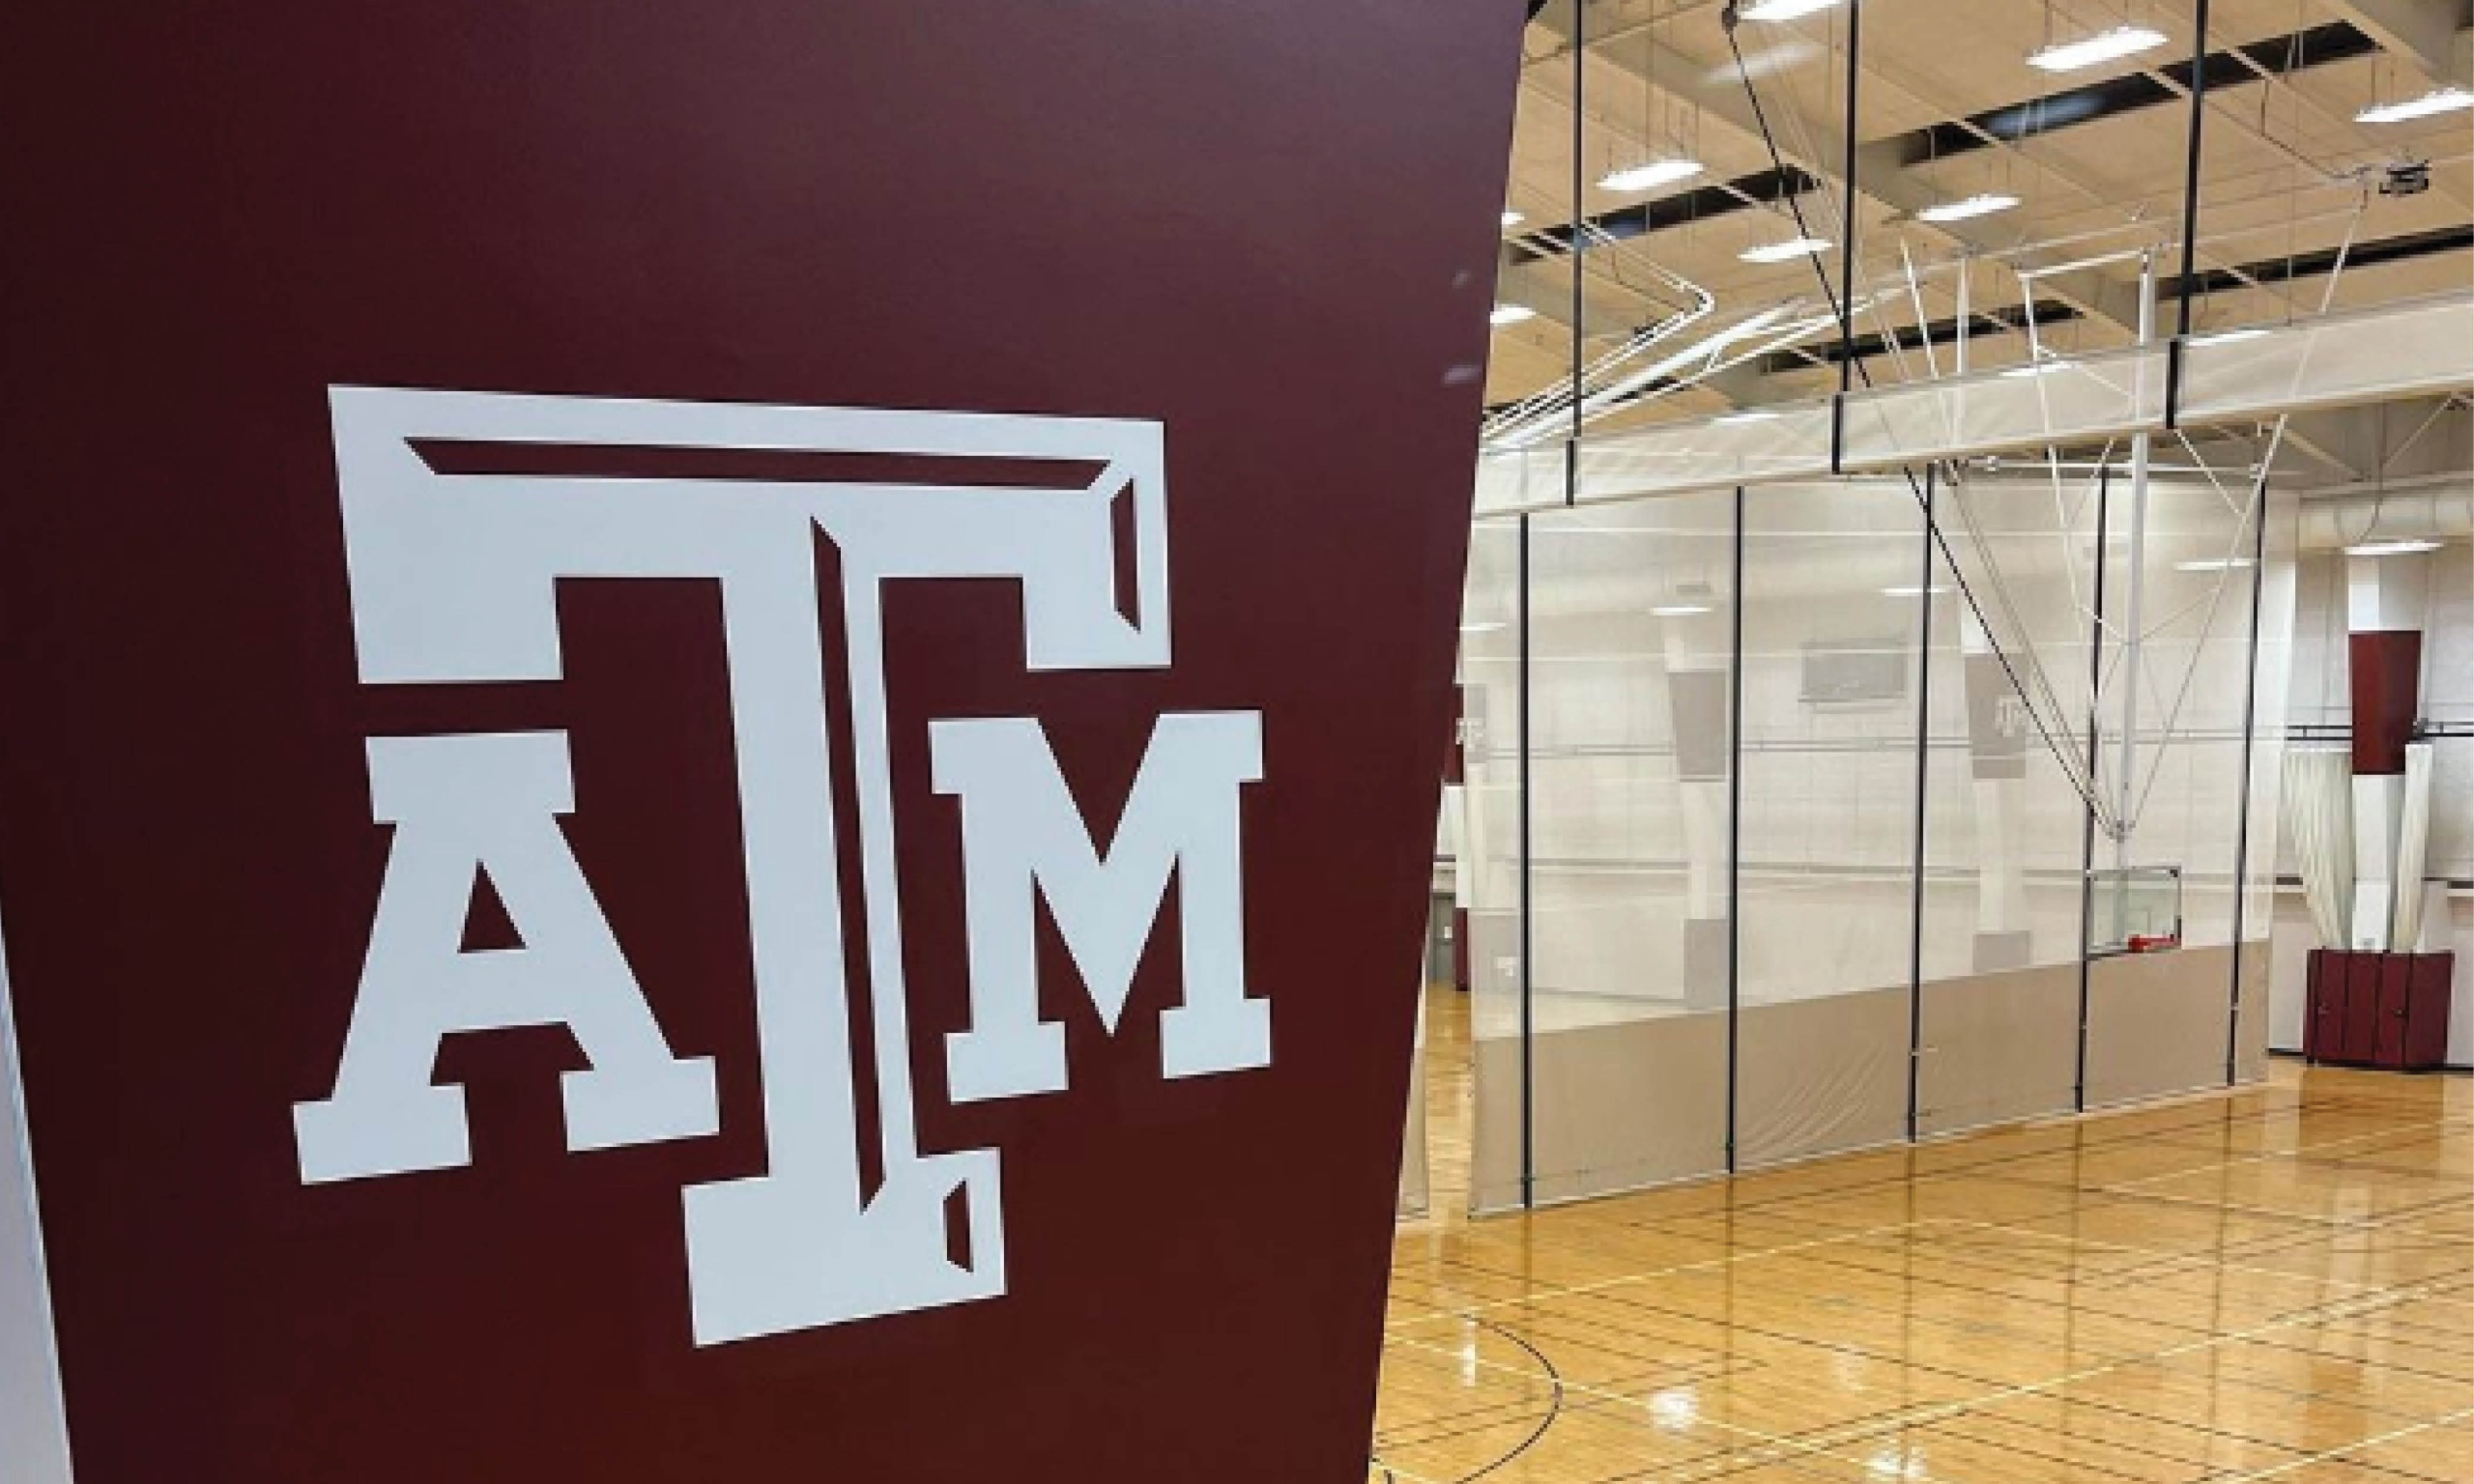 The texas a & m aggies logo is on the wall of the courts in PEAP.